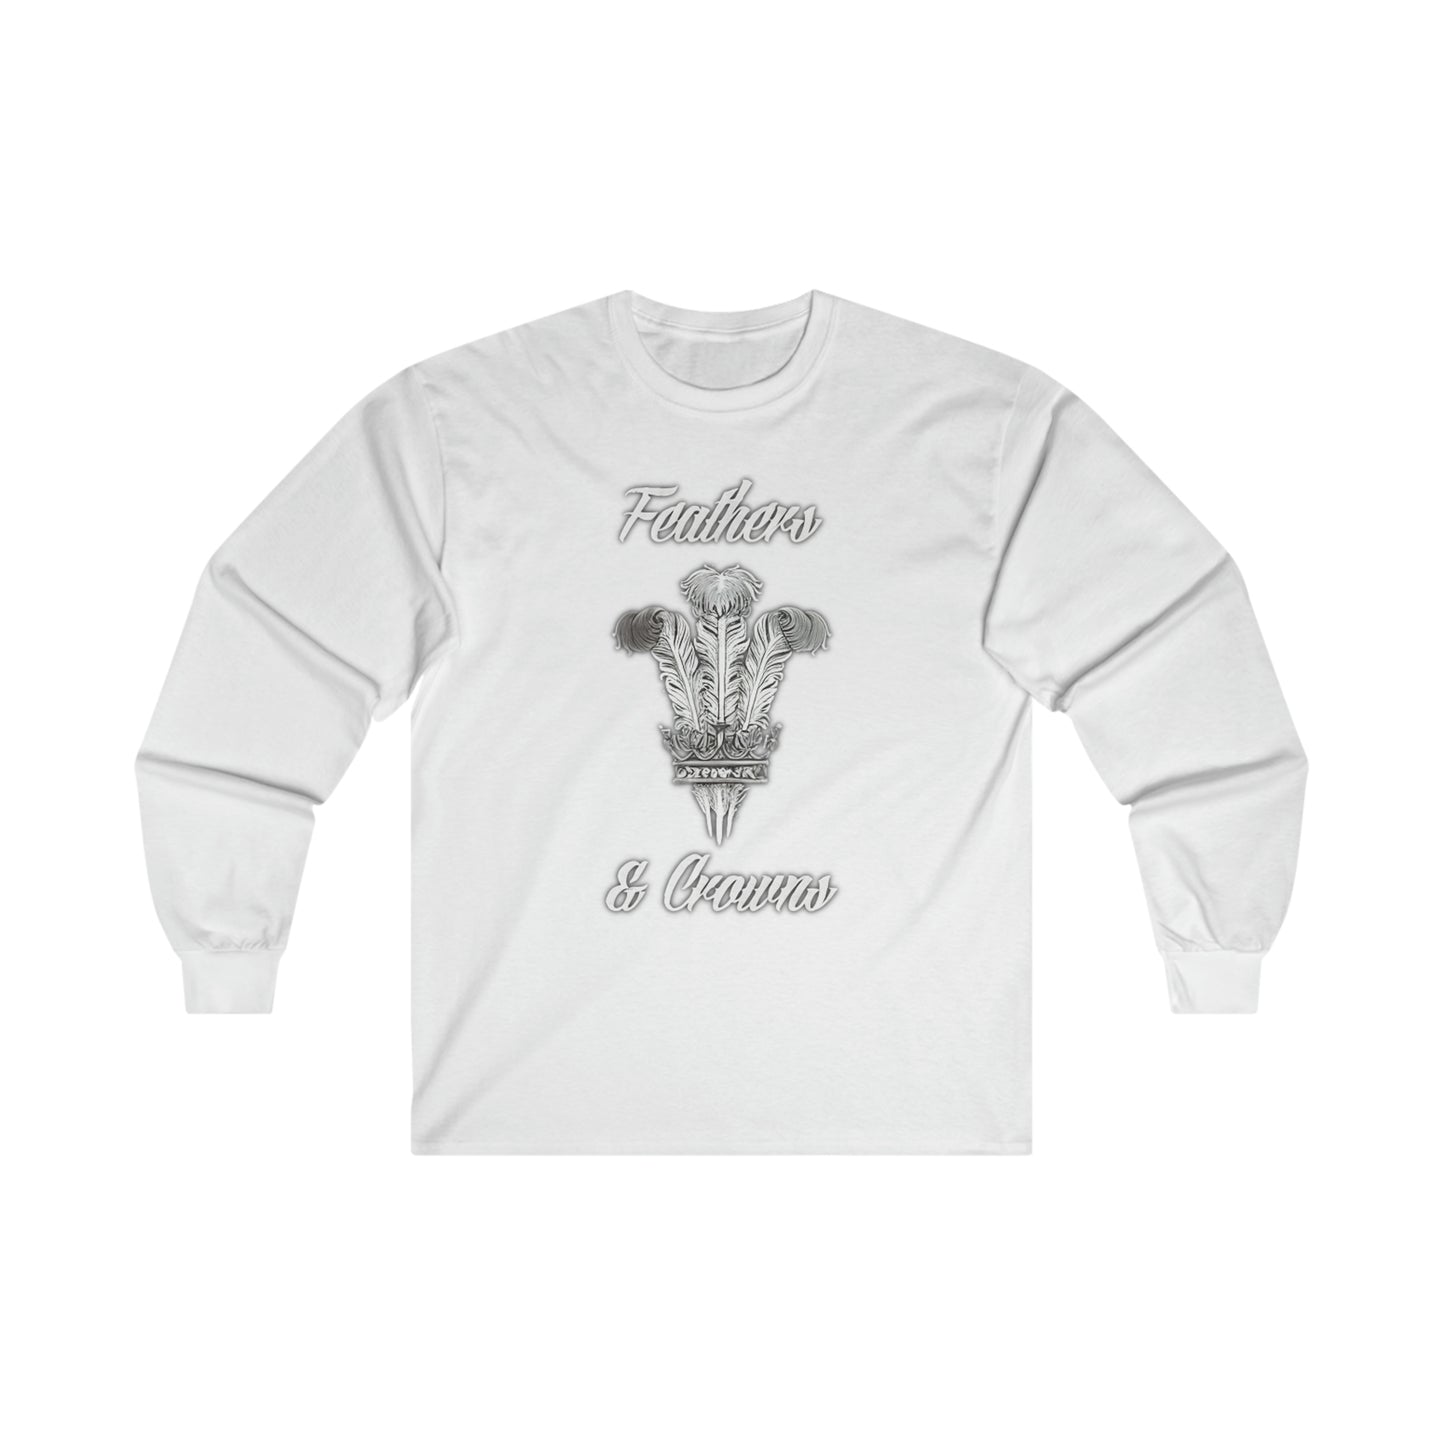 Feathers and Crowns B/W Logo Long Sleeve Tee